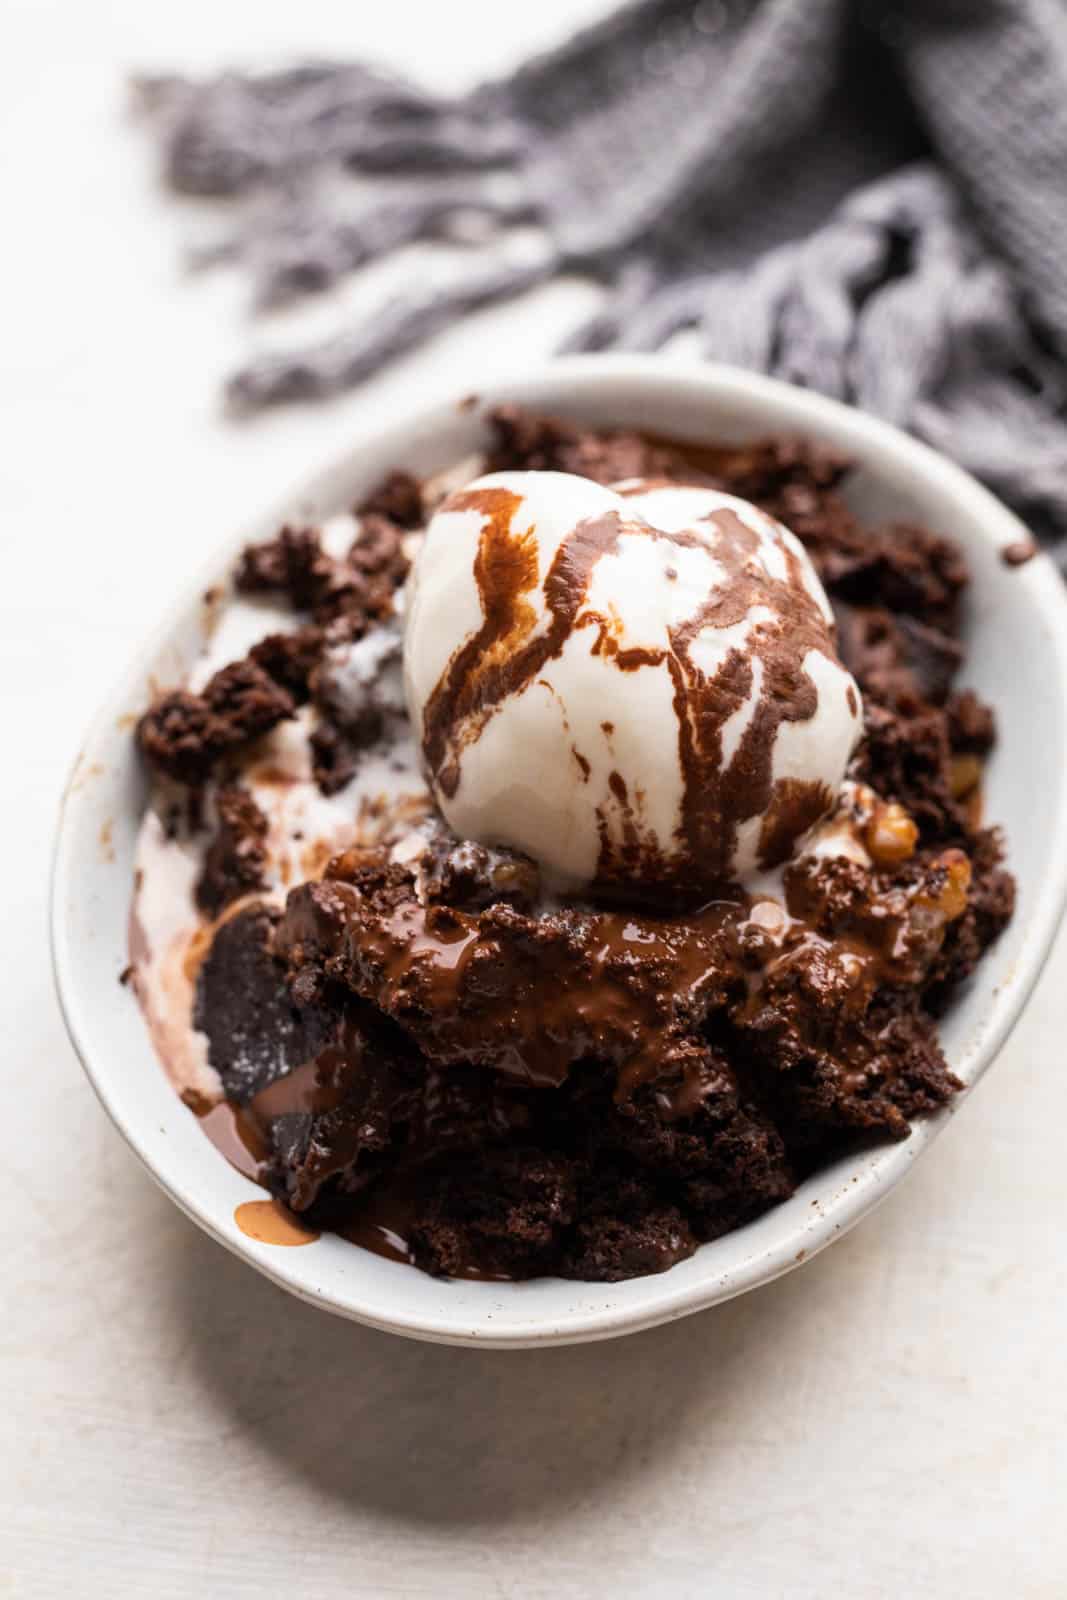 Eggless chocolate pudding cake served in a bowl with ice cream on top